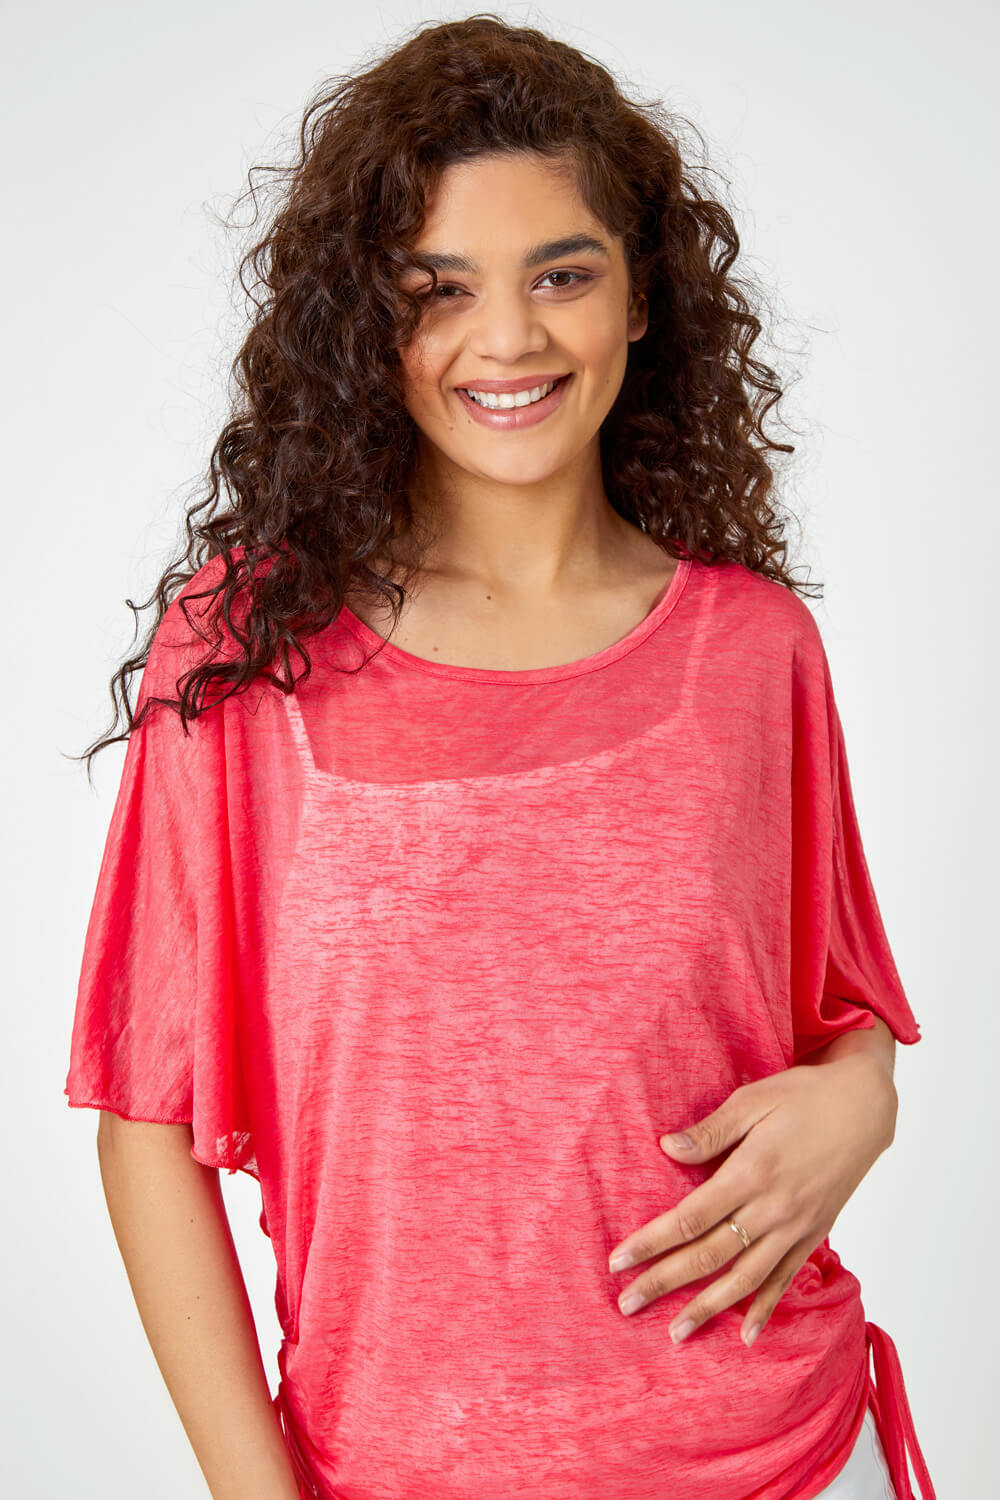 PINK Ruched Batwing Mesh Top, Image 4 of 5